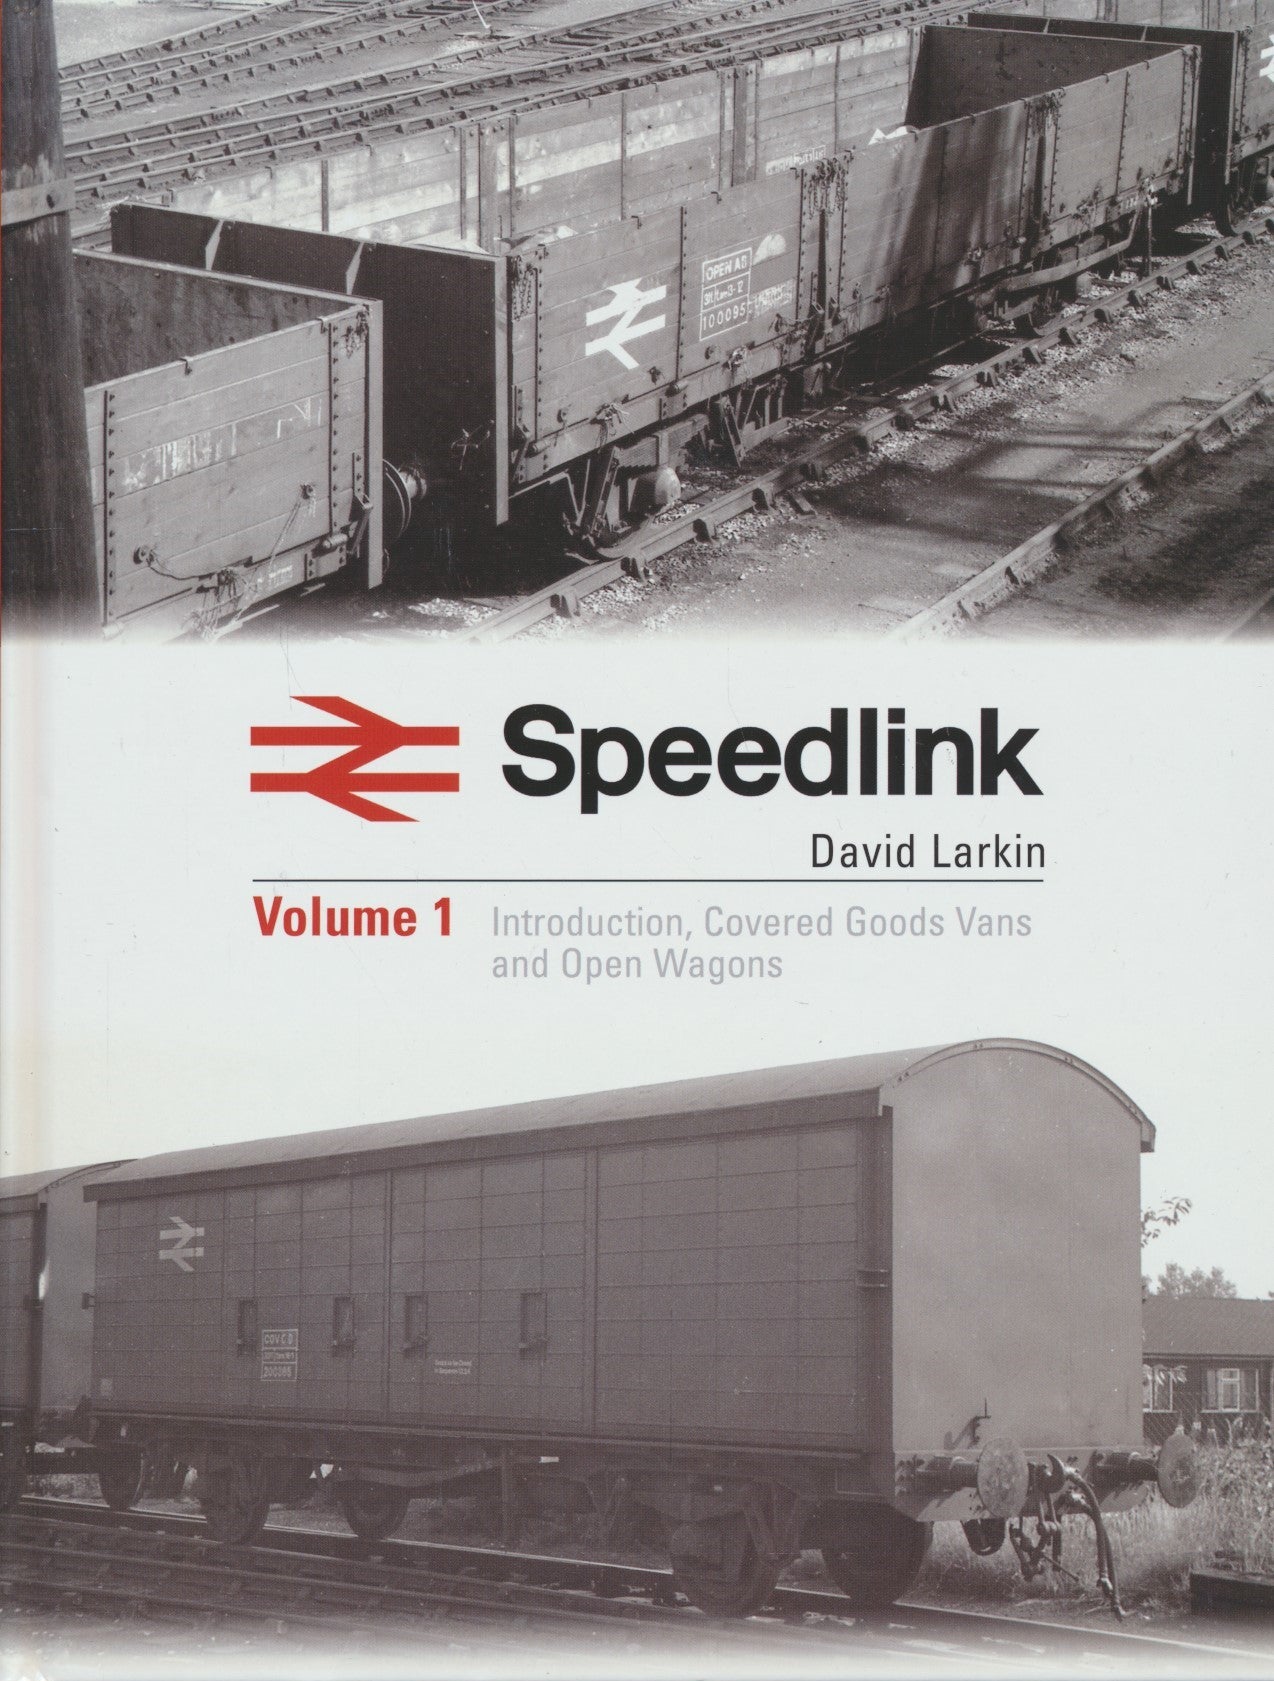 Speedlink Volume 1 Introduction, Covered Goods Vans and Open Wagons